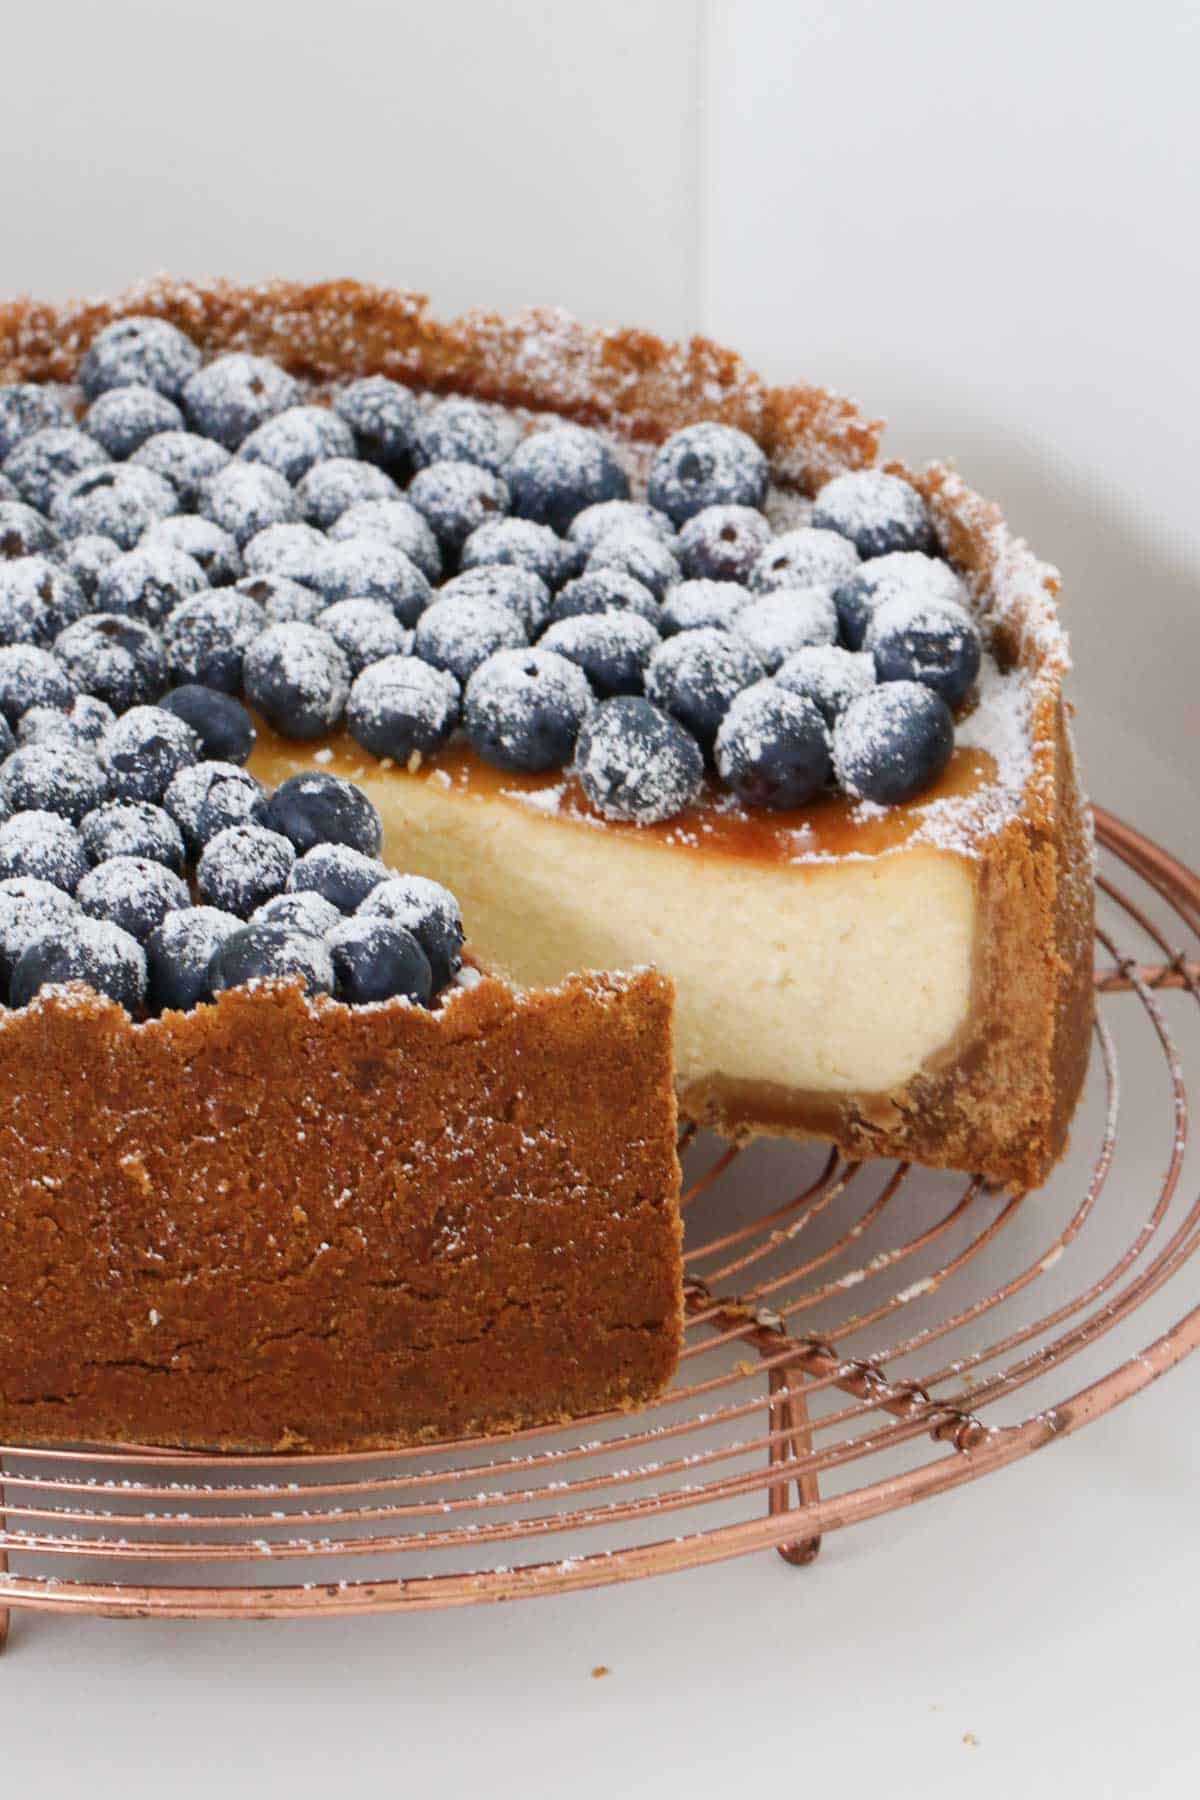 A cheesecake topped with blueberries on a copper tray, with one slice removed.